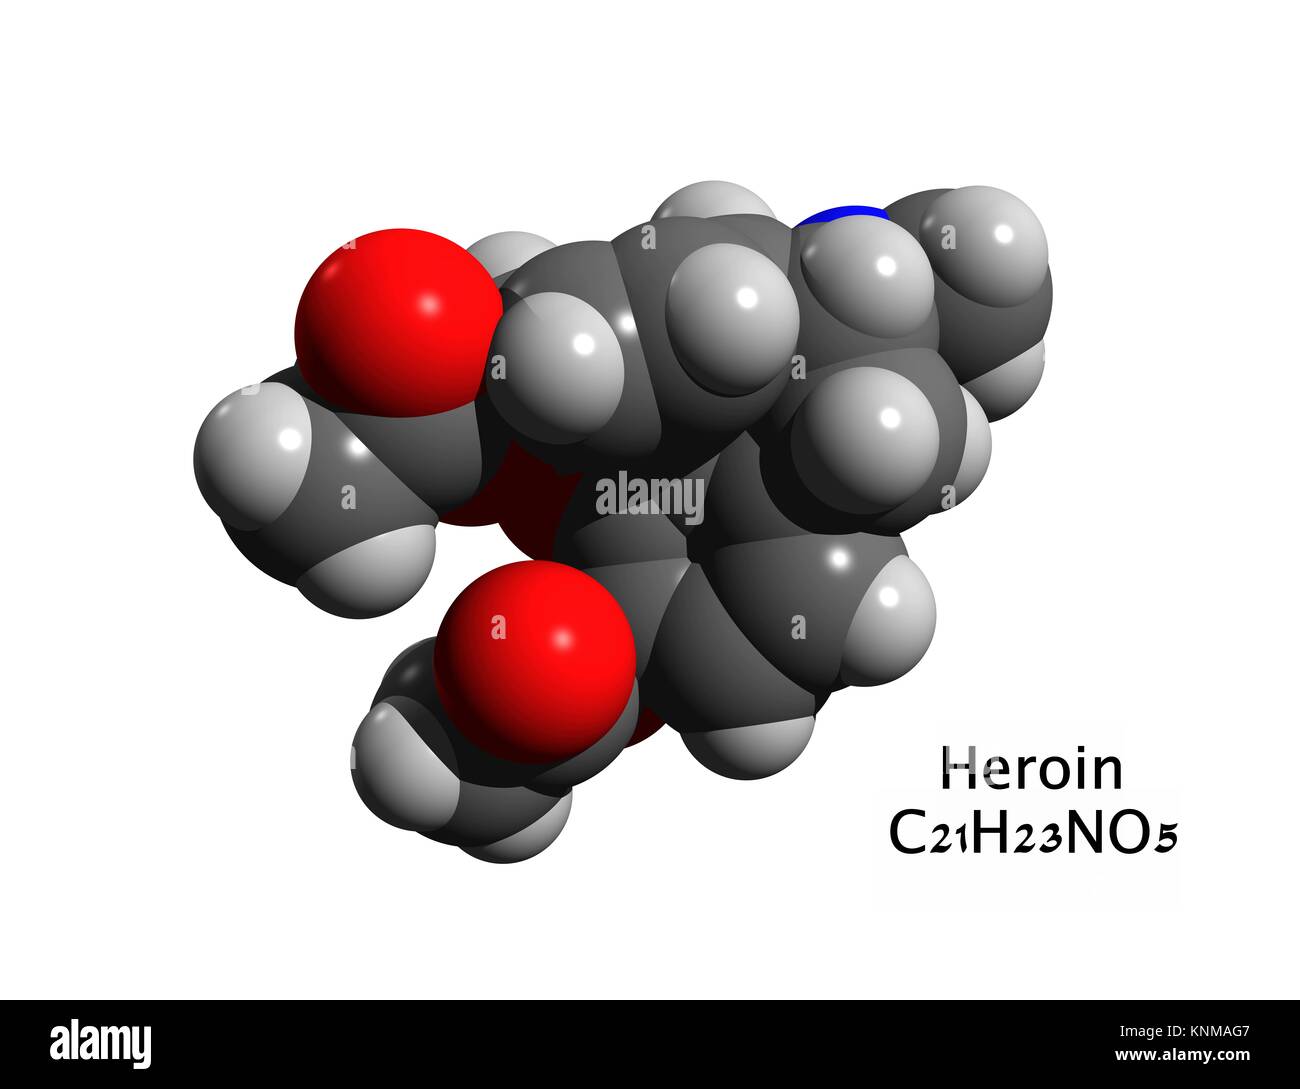 Molecular structure of heroin (diamorphine), an opioid mostly used as a recreational drug, 3D rendering Stock Photo